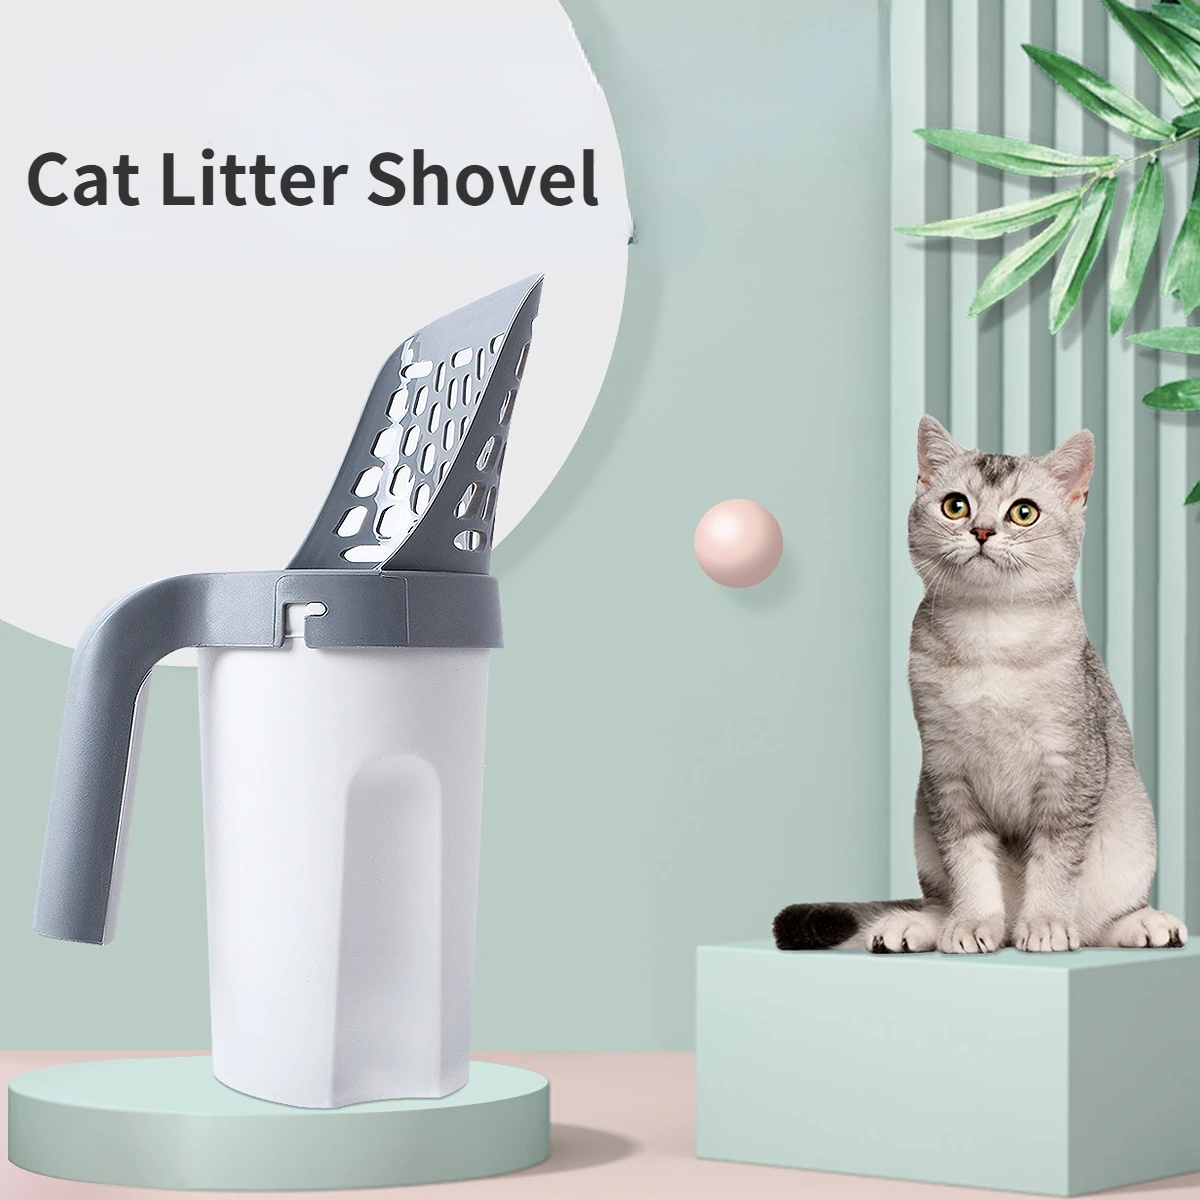 Multifunction Cat Litter Shovel Pet Cleanning 2 in 1Tool Plastic Scoop Cat Sand Cleaning Products Toilet For Cat Dog Supplies